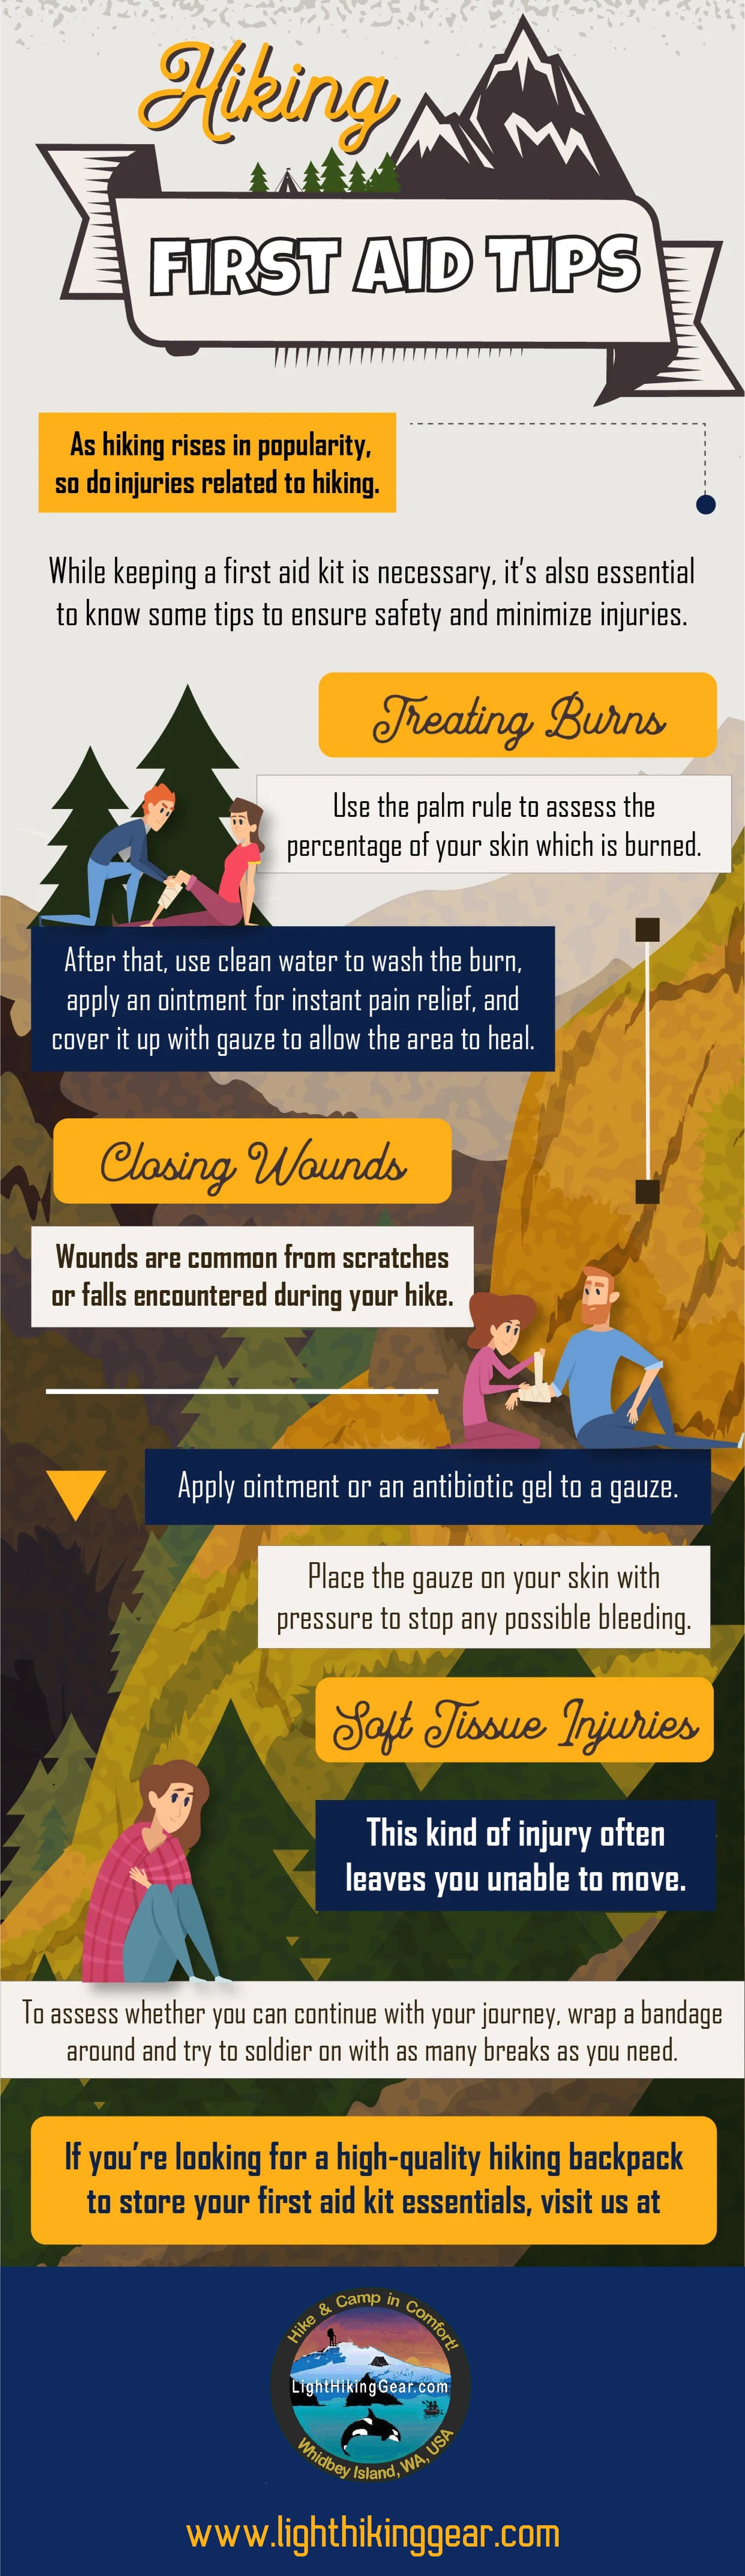 Hiking First Aid Tips | Infographic